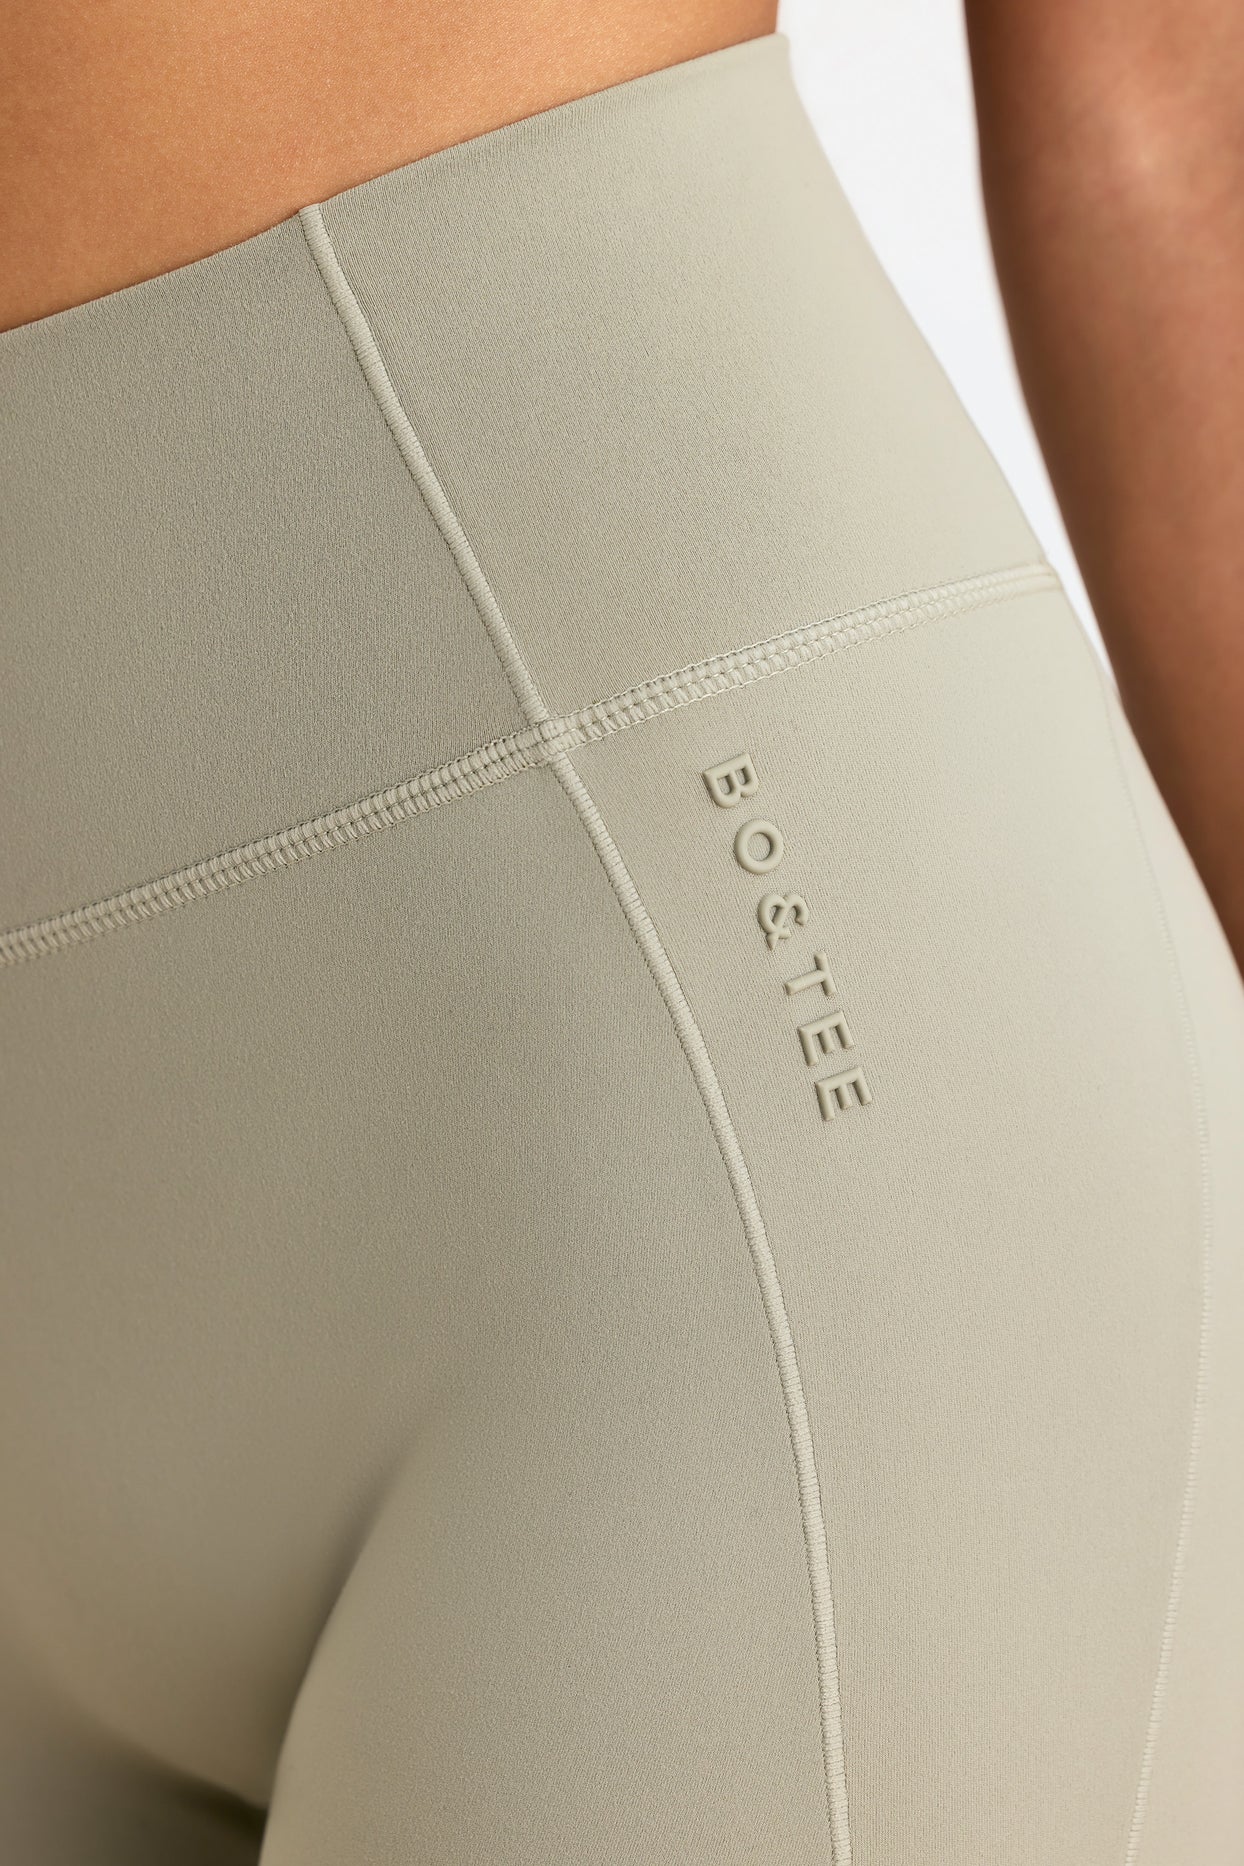 Soft Active Leggings in Mineral